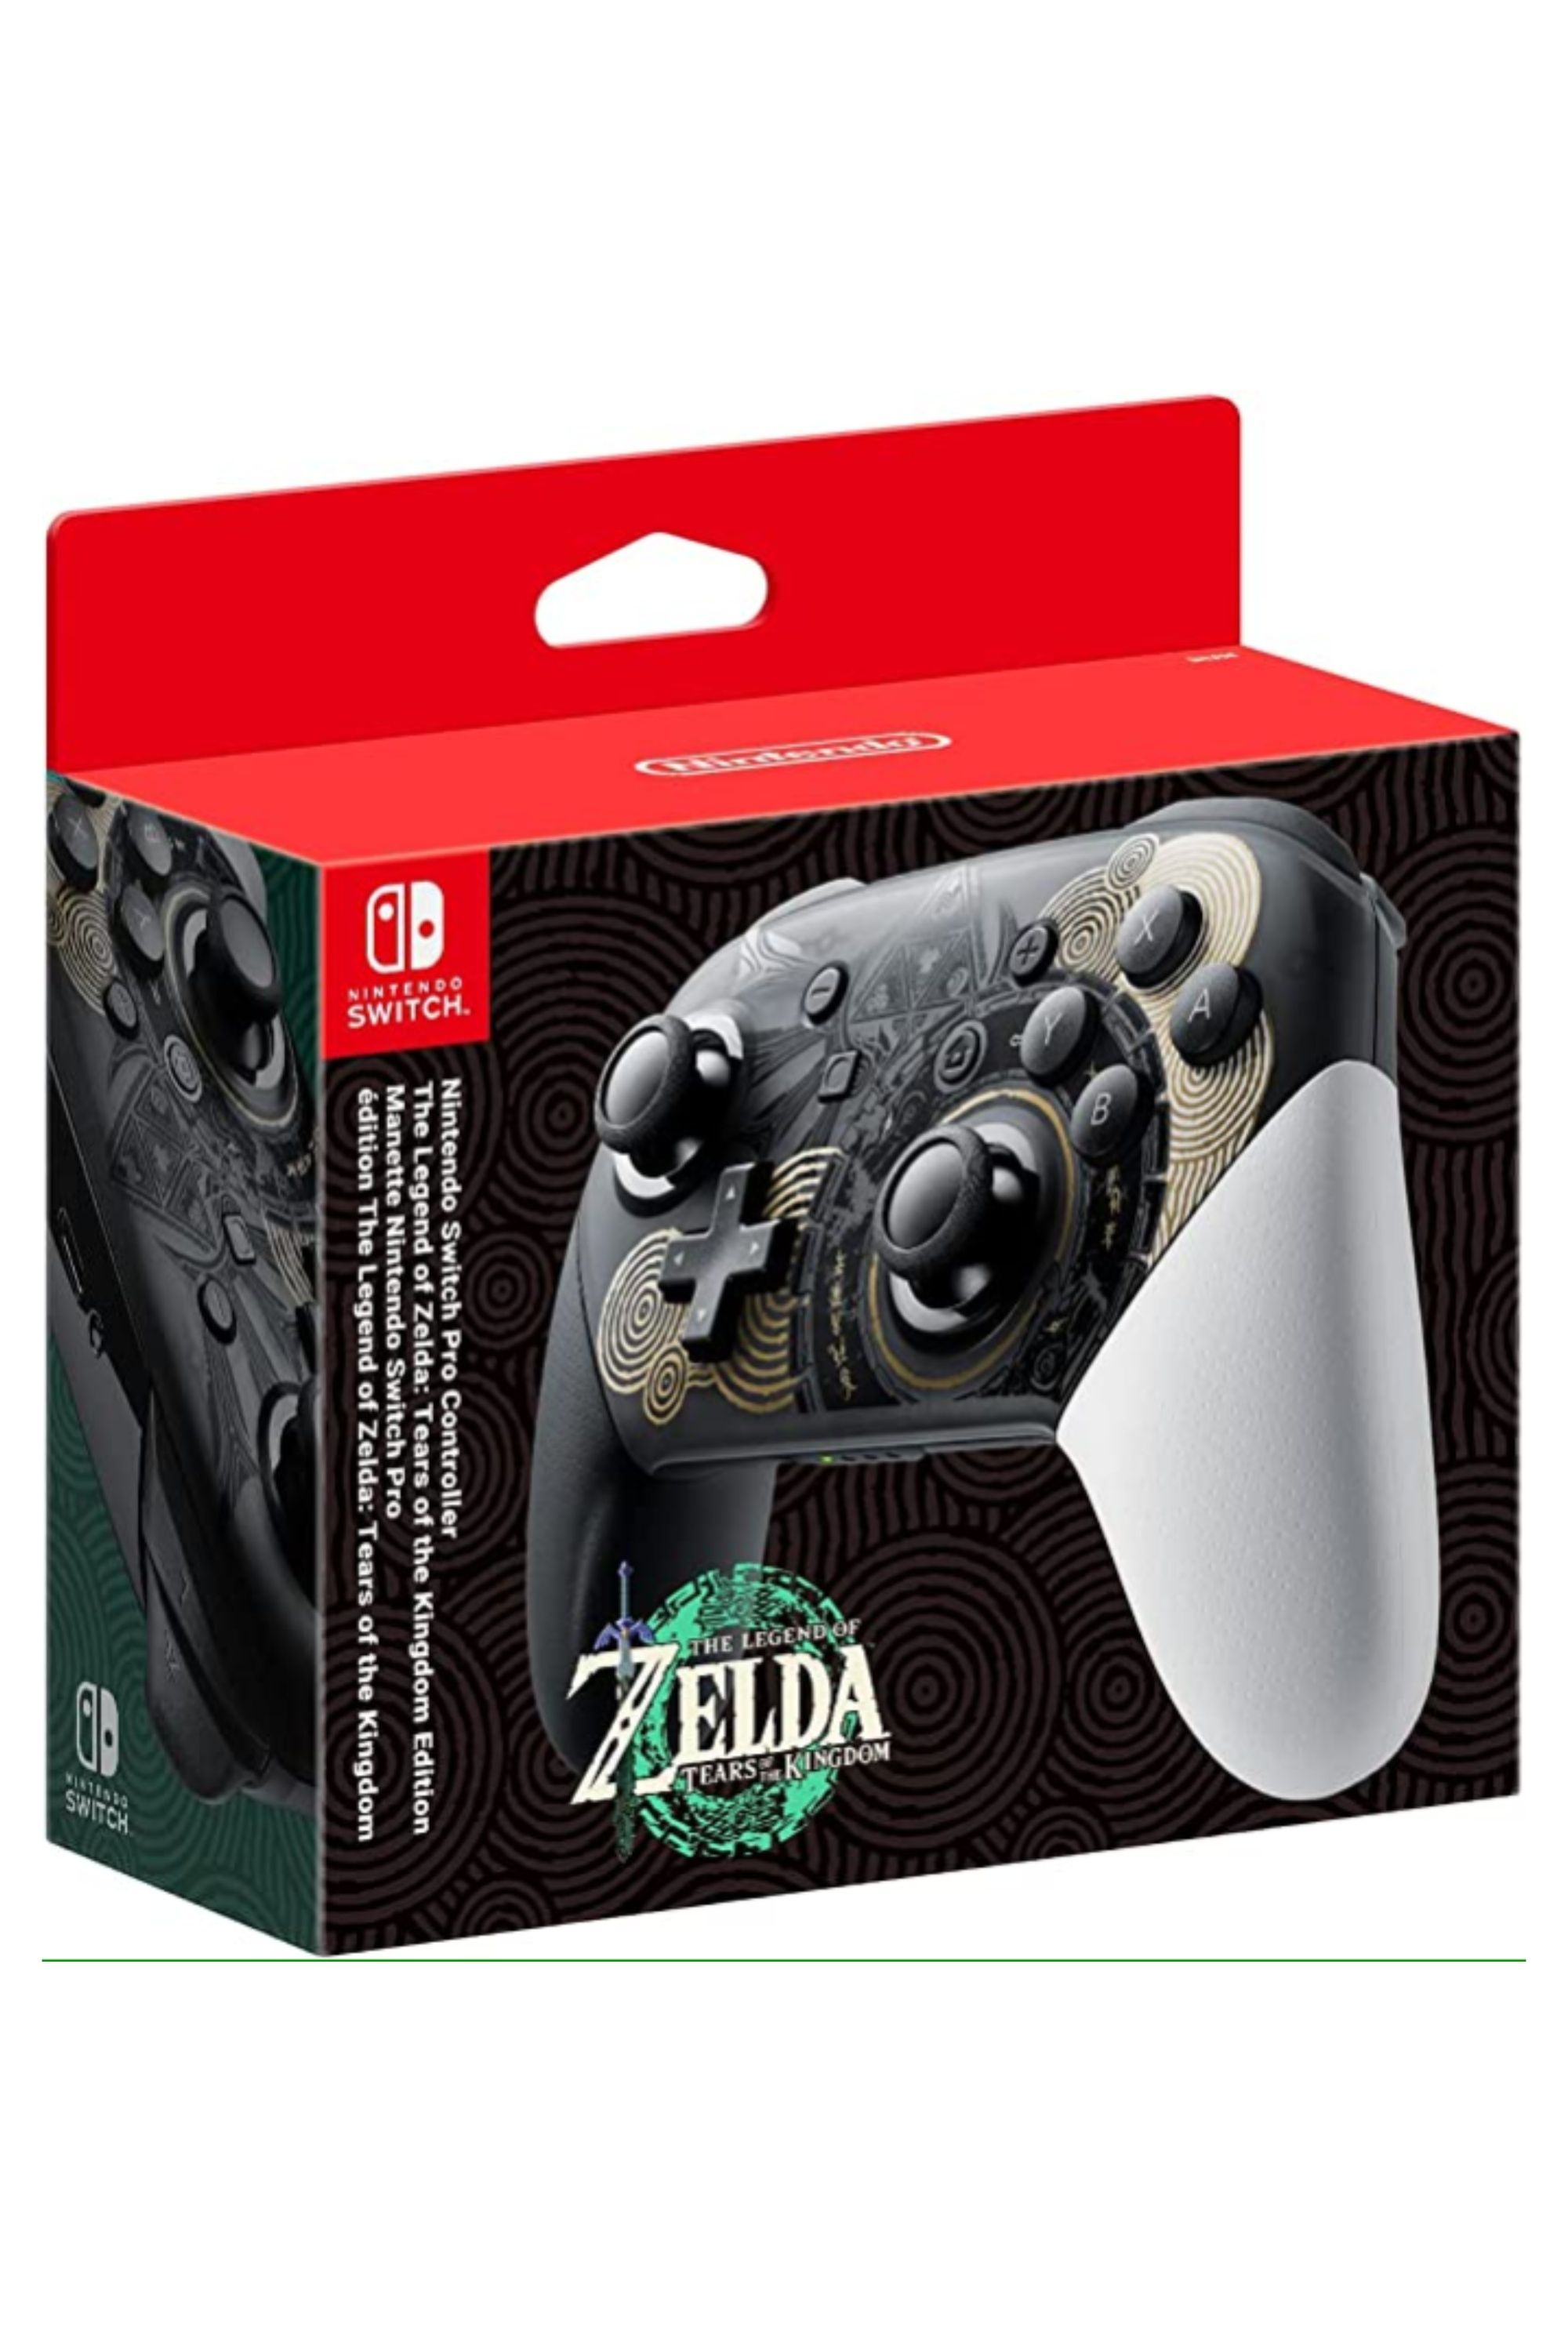 tears of the kingdom nintendo switch pro controller